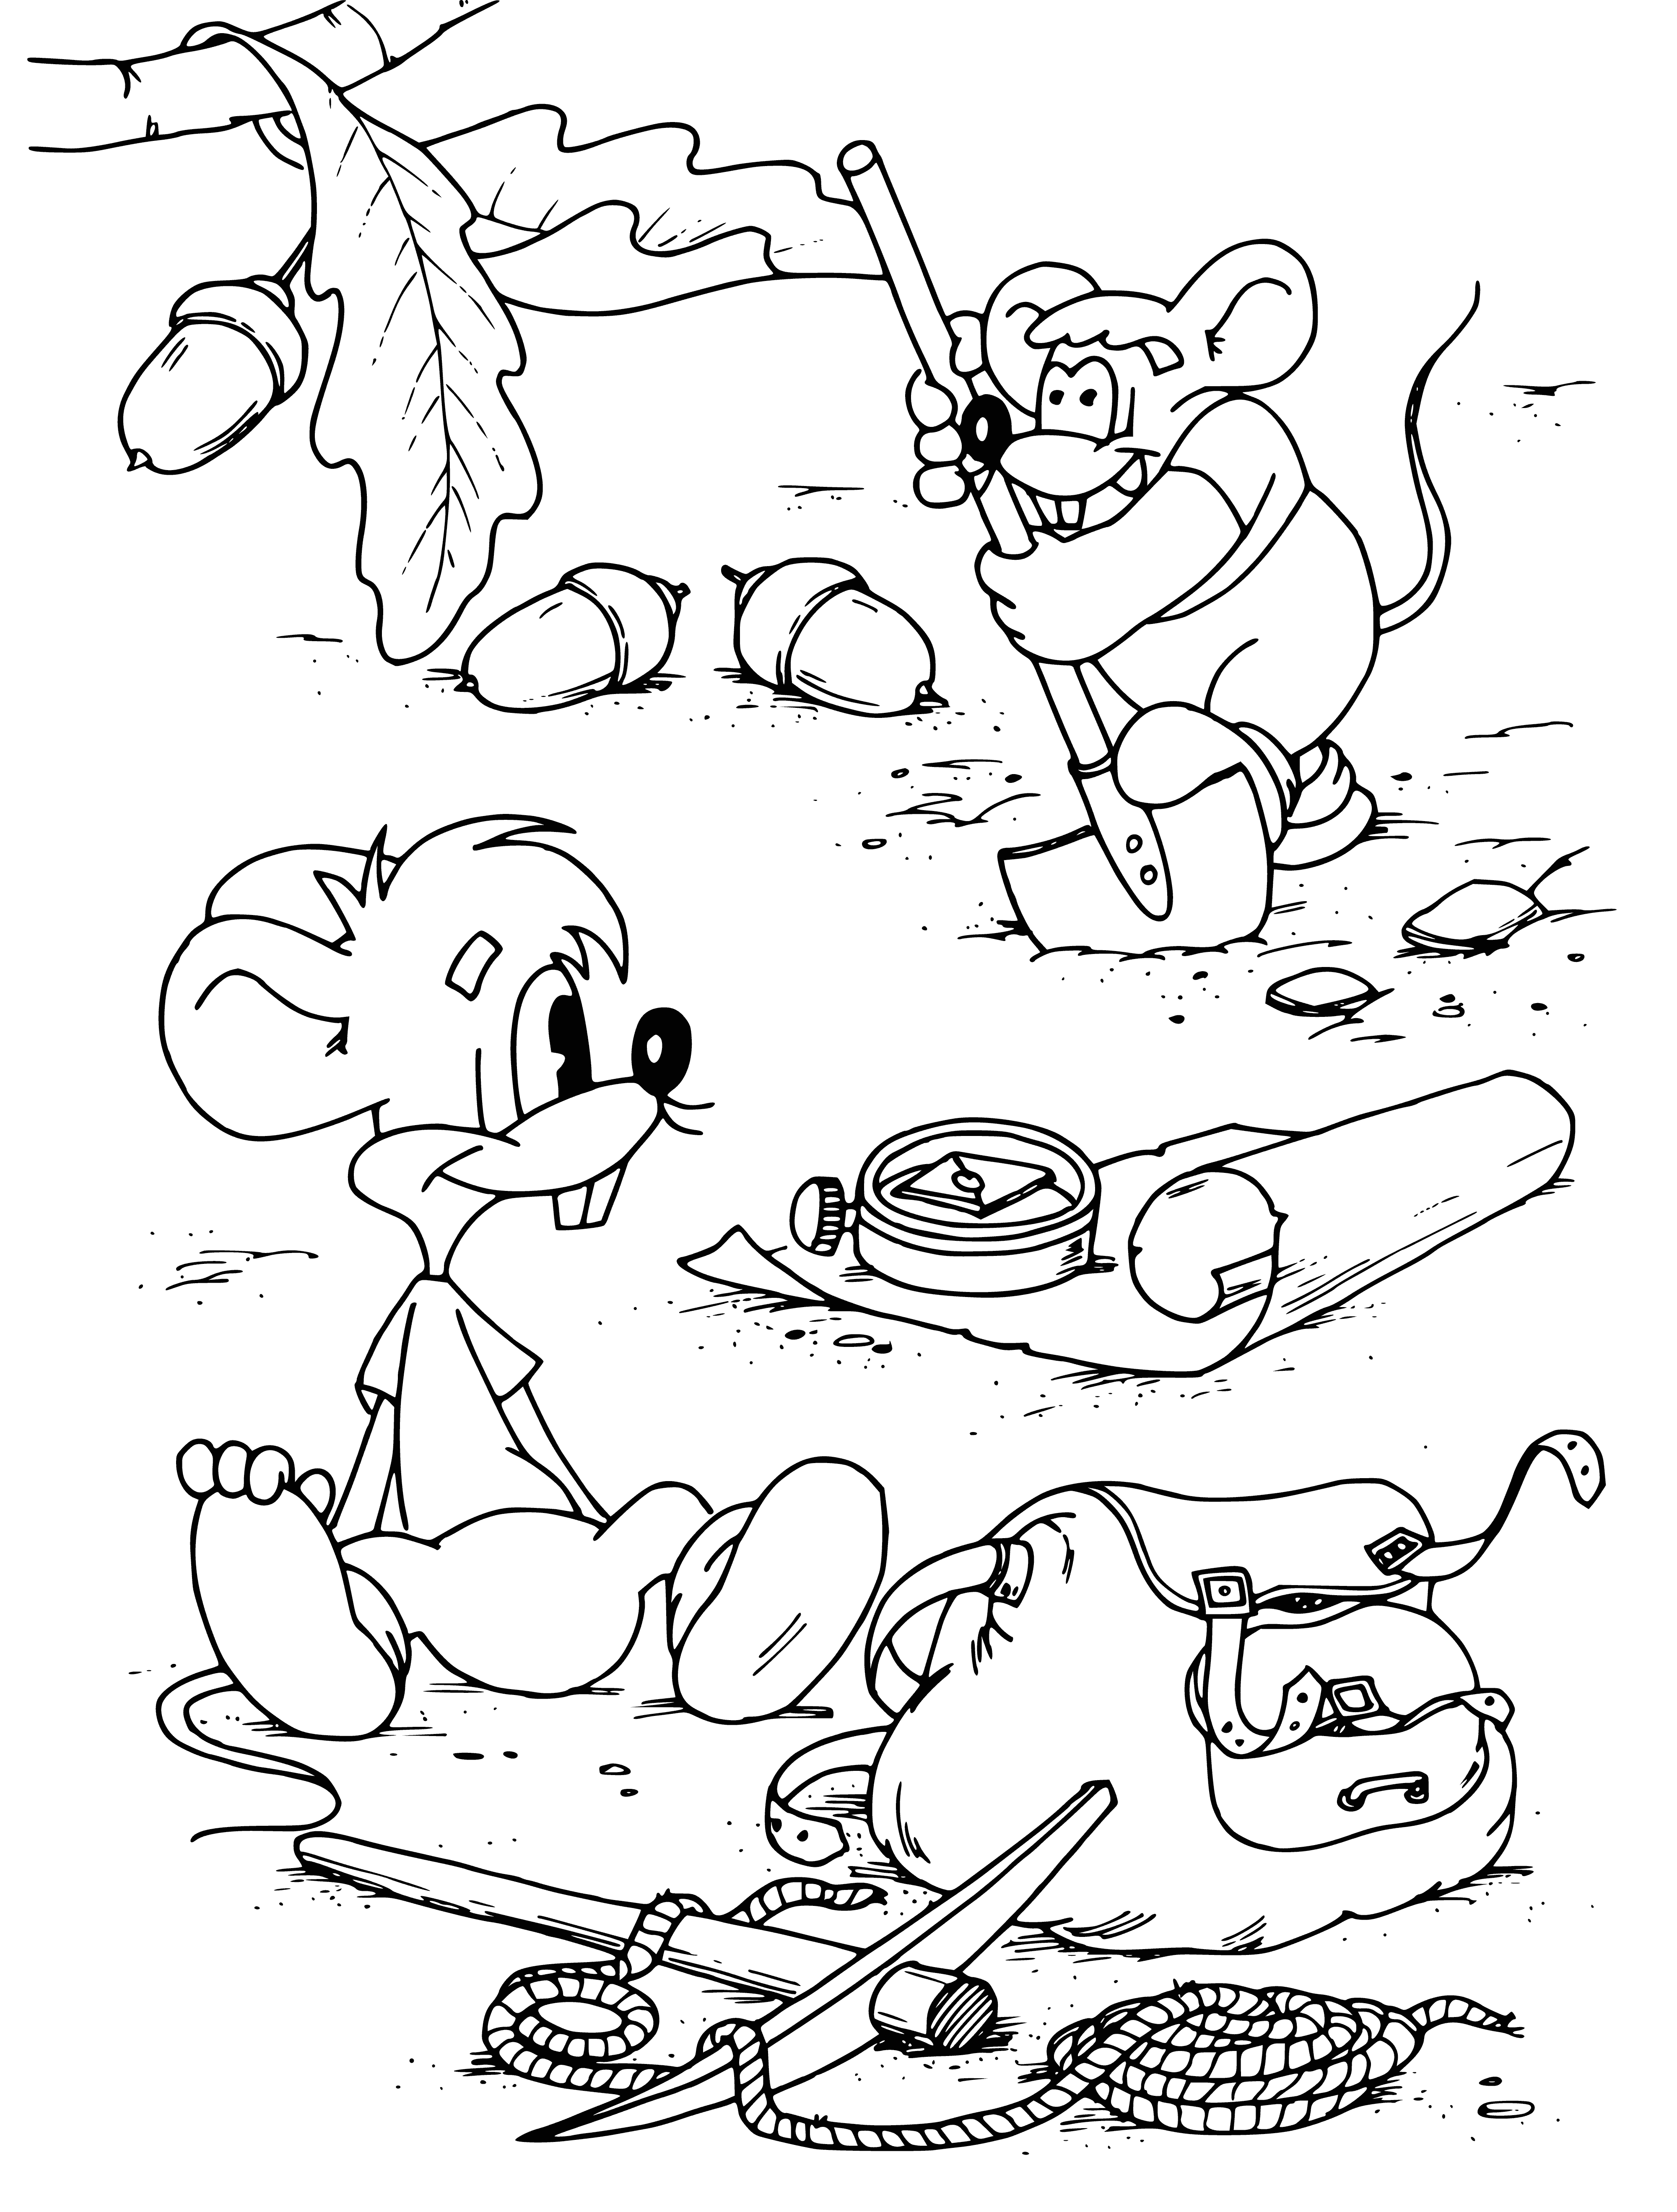 coloring page: 3 mice on top of a treasure chest looking down. Cat looking up, curious about the mice's excitement. #funny #animals